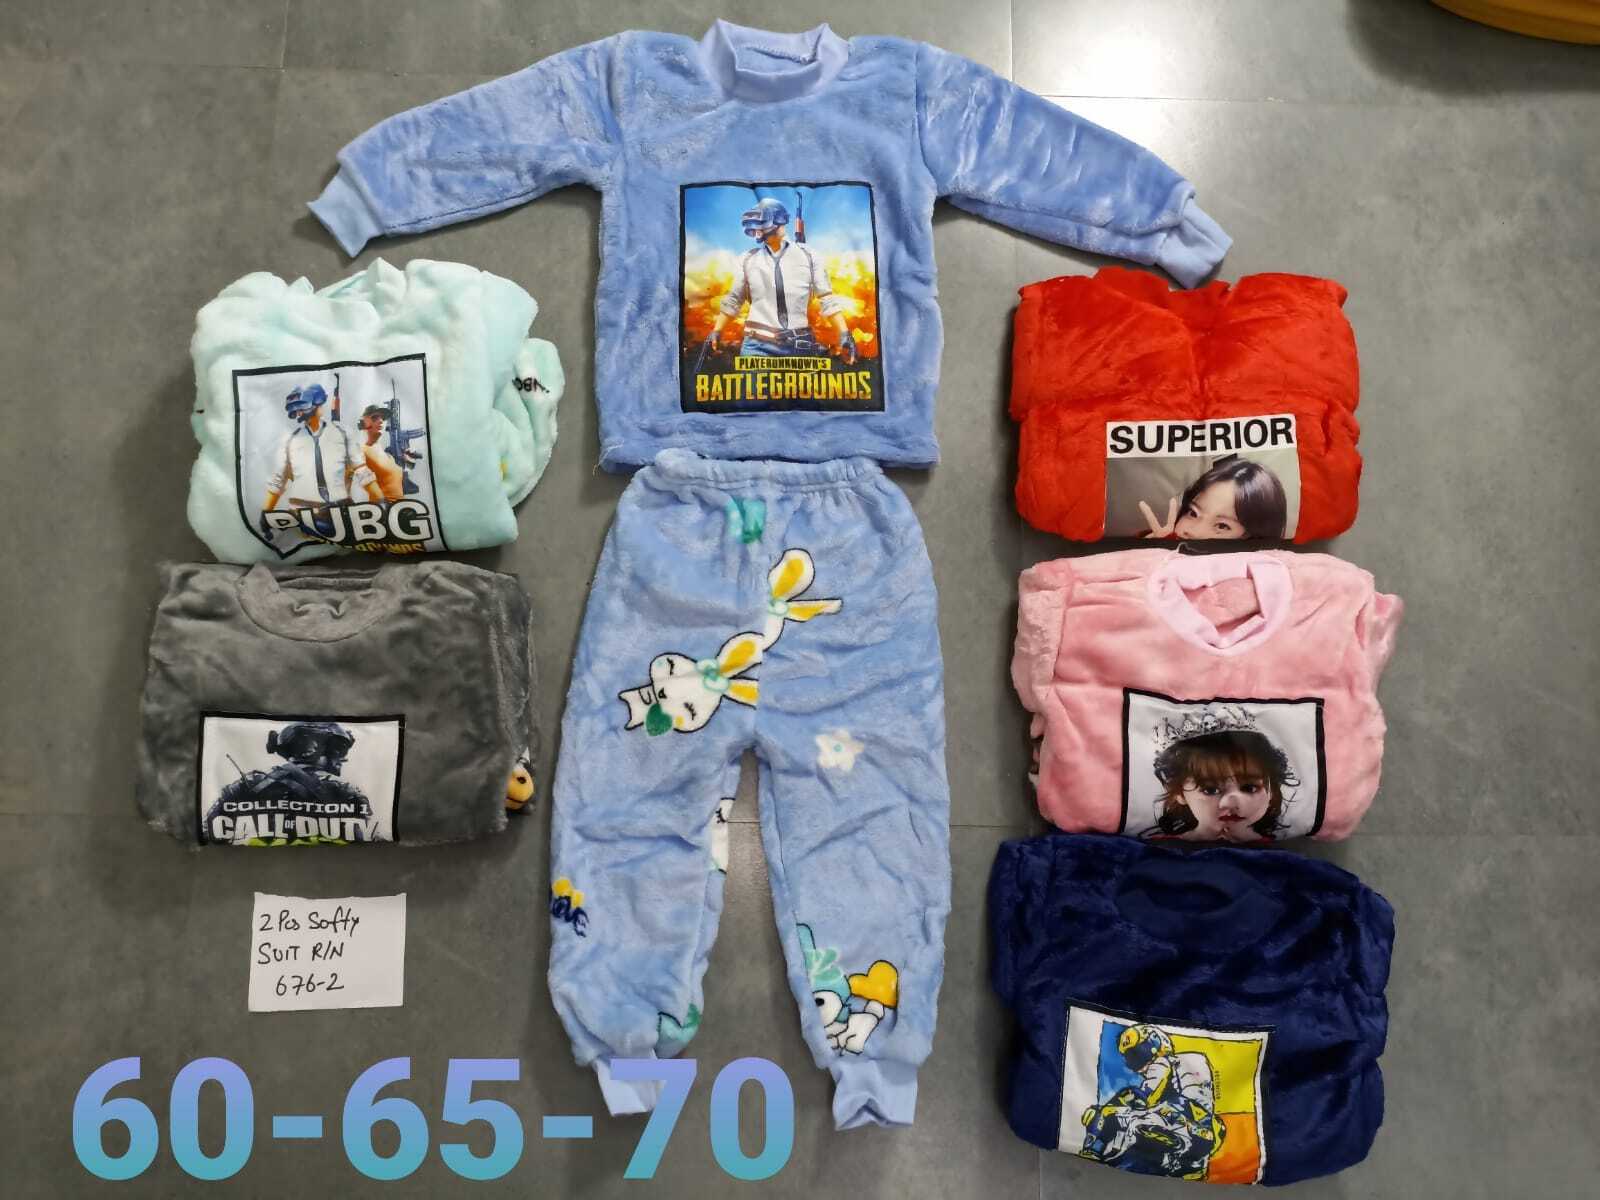 baby suit